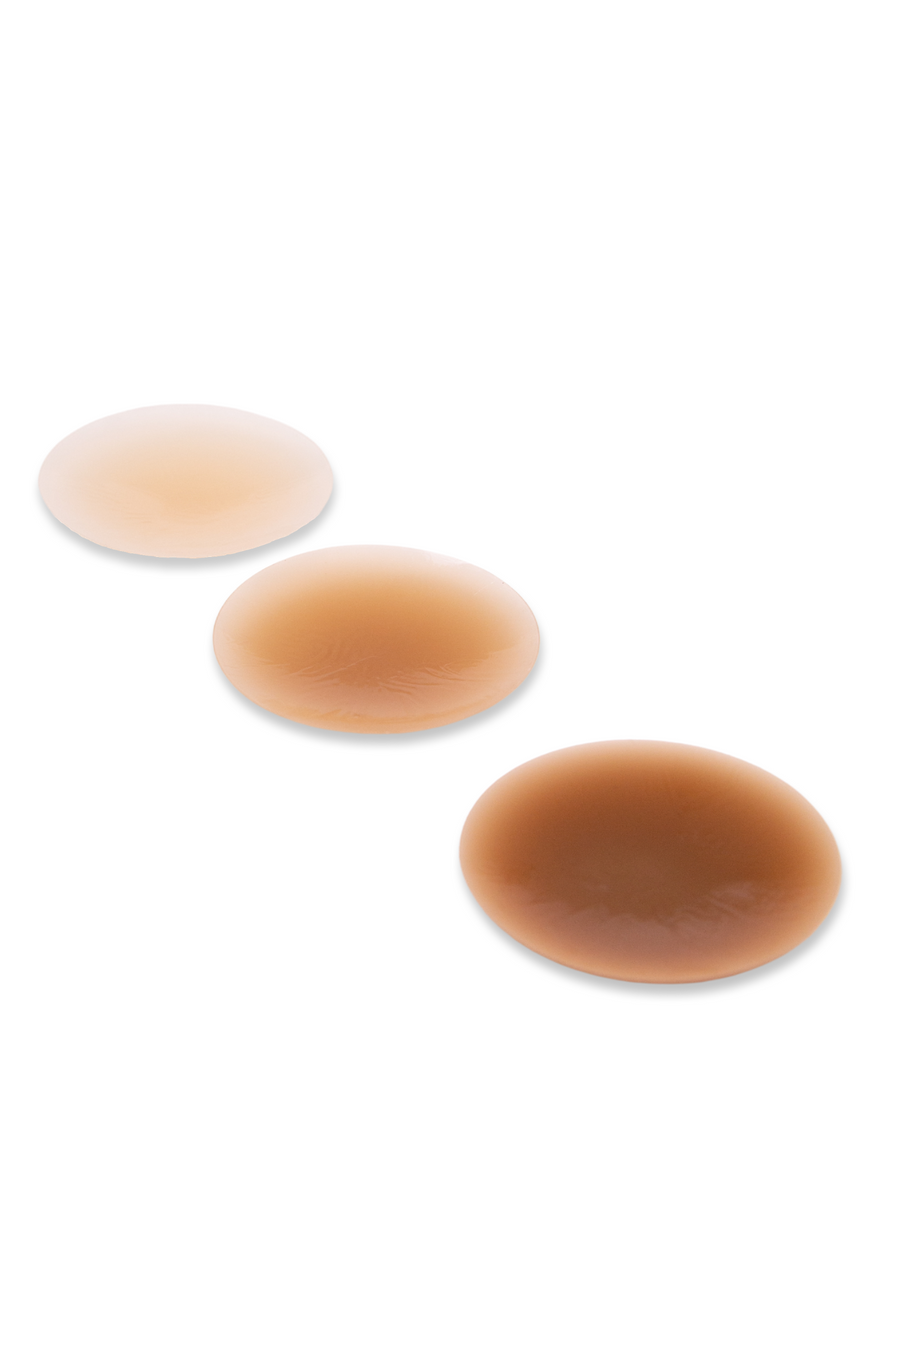 Silicone Nipple Covers - A-DD Sizes - Matte Finish - Compact